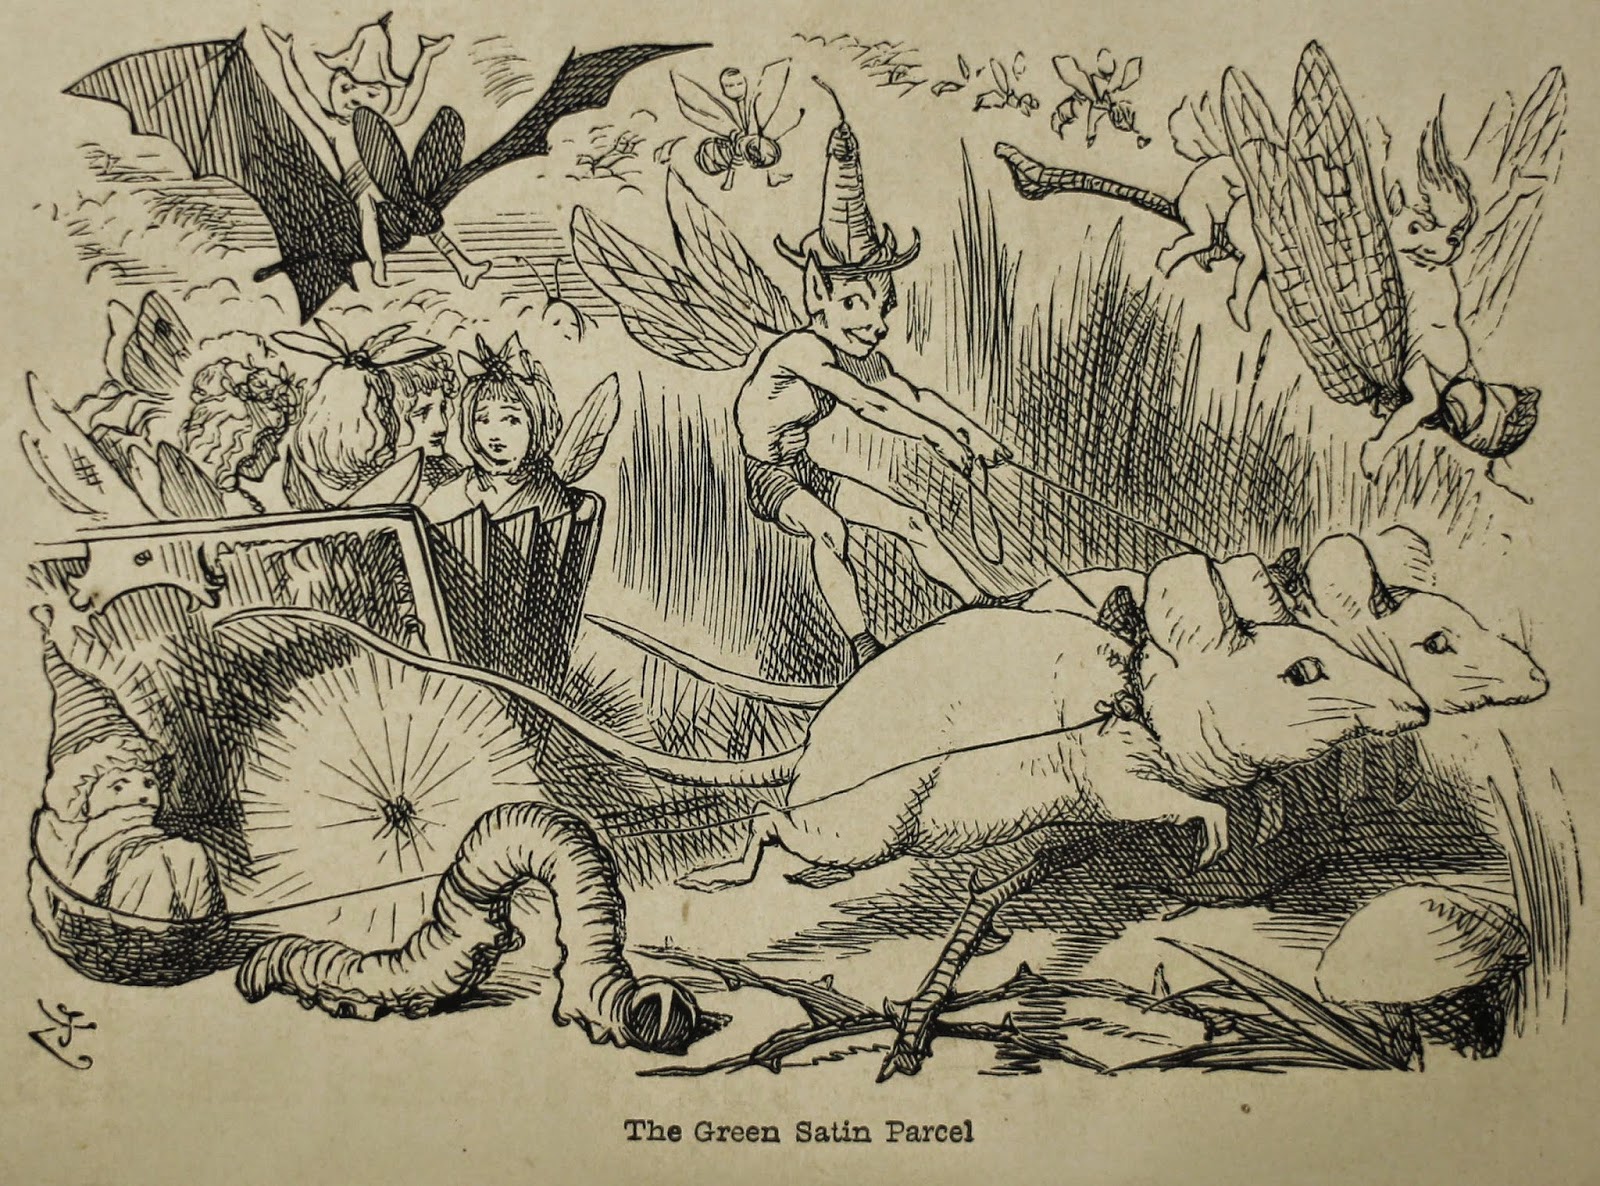 Illustration titled "The Green Satin Parcel" with a male fairy controlling two mice that are pulling a pocket book carriage of female fairies